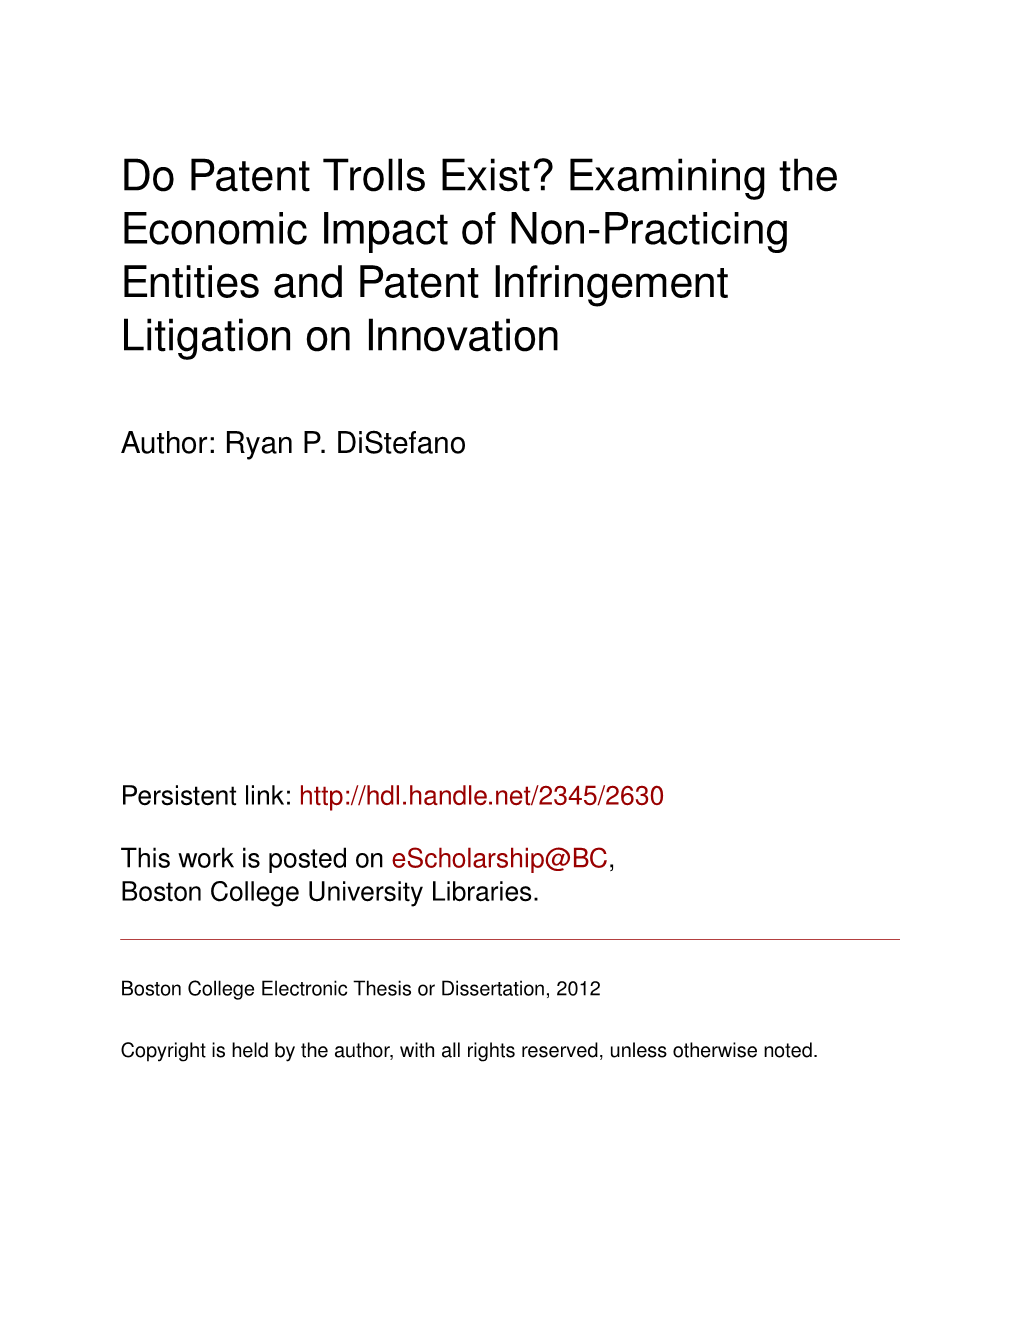 Do Patent Trolls Exist? Examining the Economic Impact of Non-Practicing Entities and Patent Infringement Litigation on Innovation